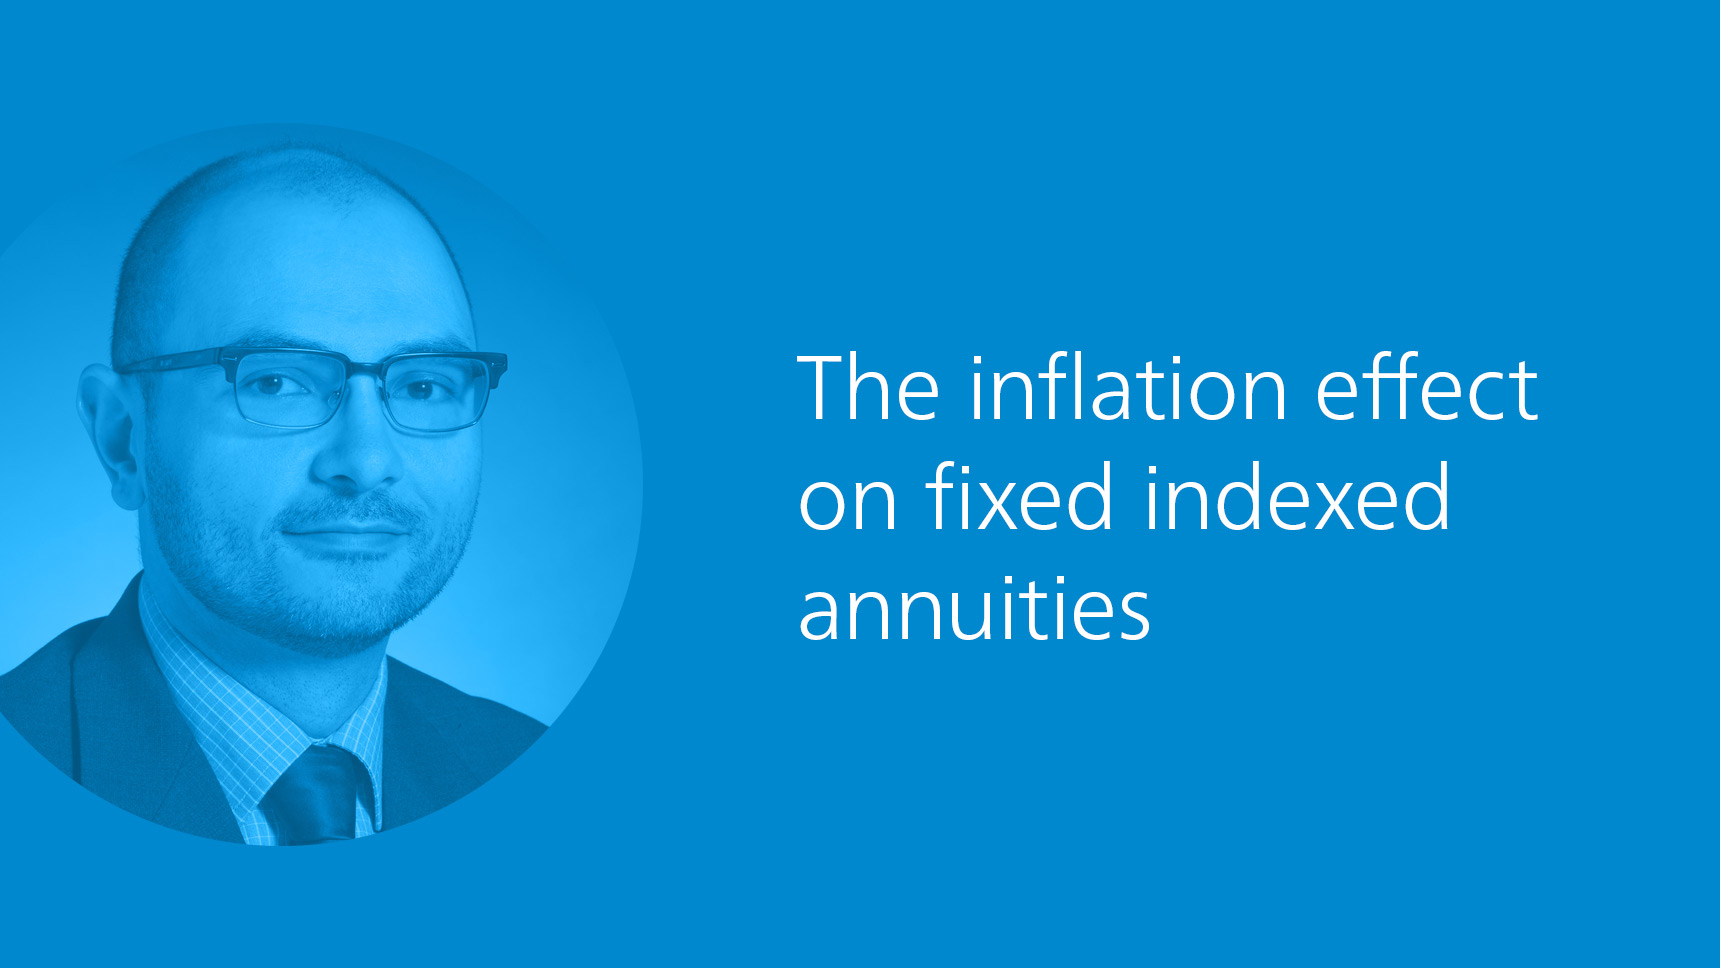 John Grevas - The inflation effect on fixed indexed annuities